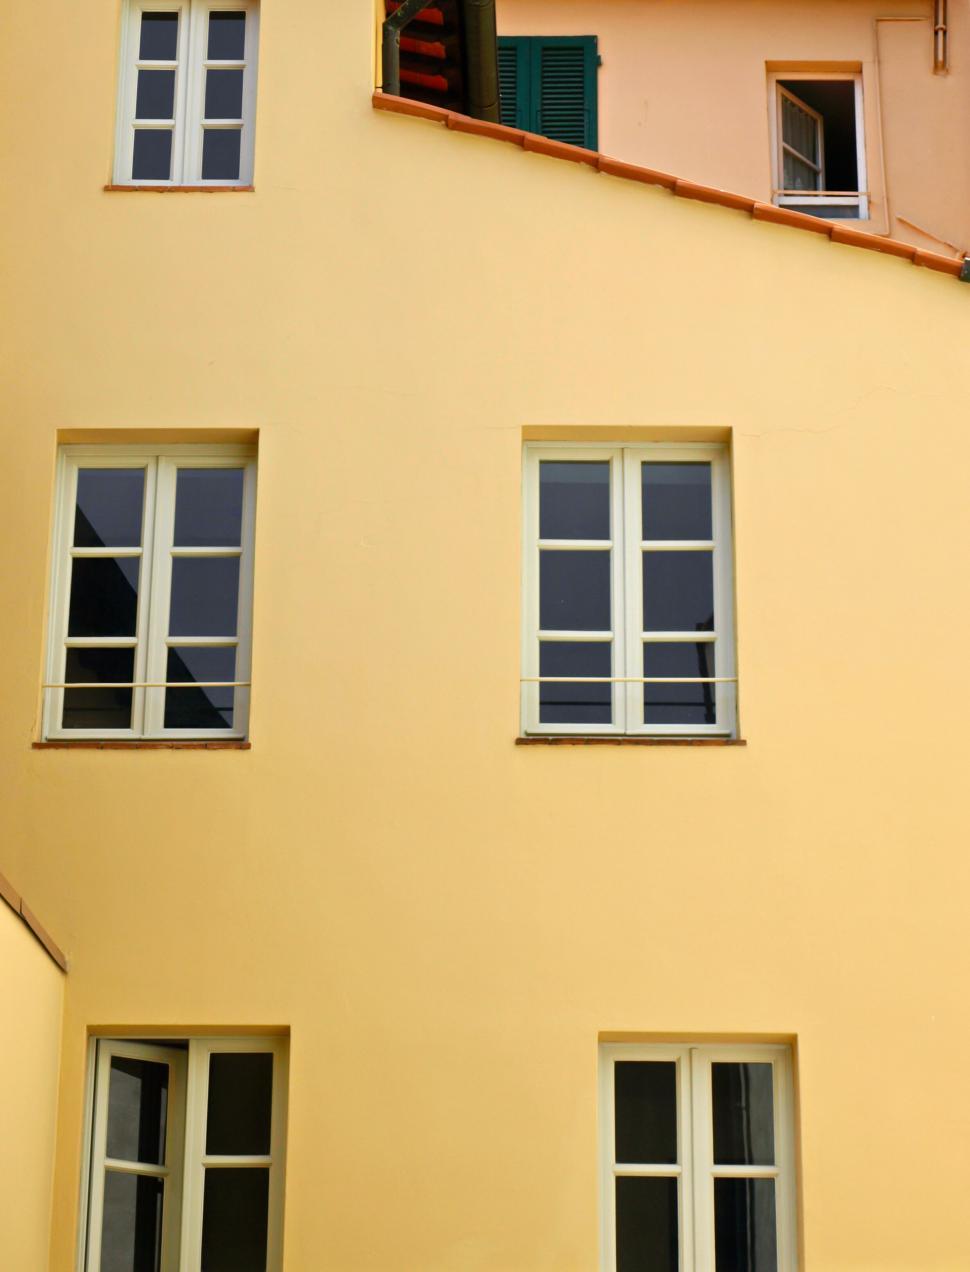 Free Image of Bright yellow building with green shutters 